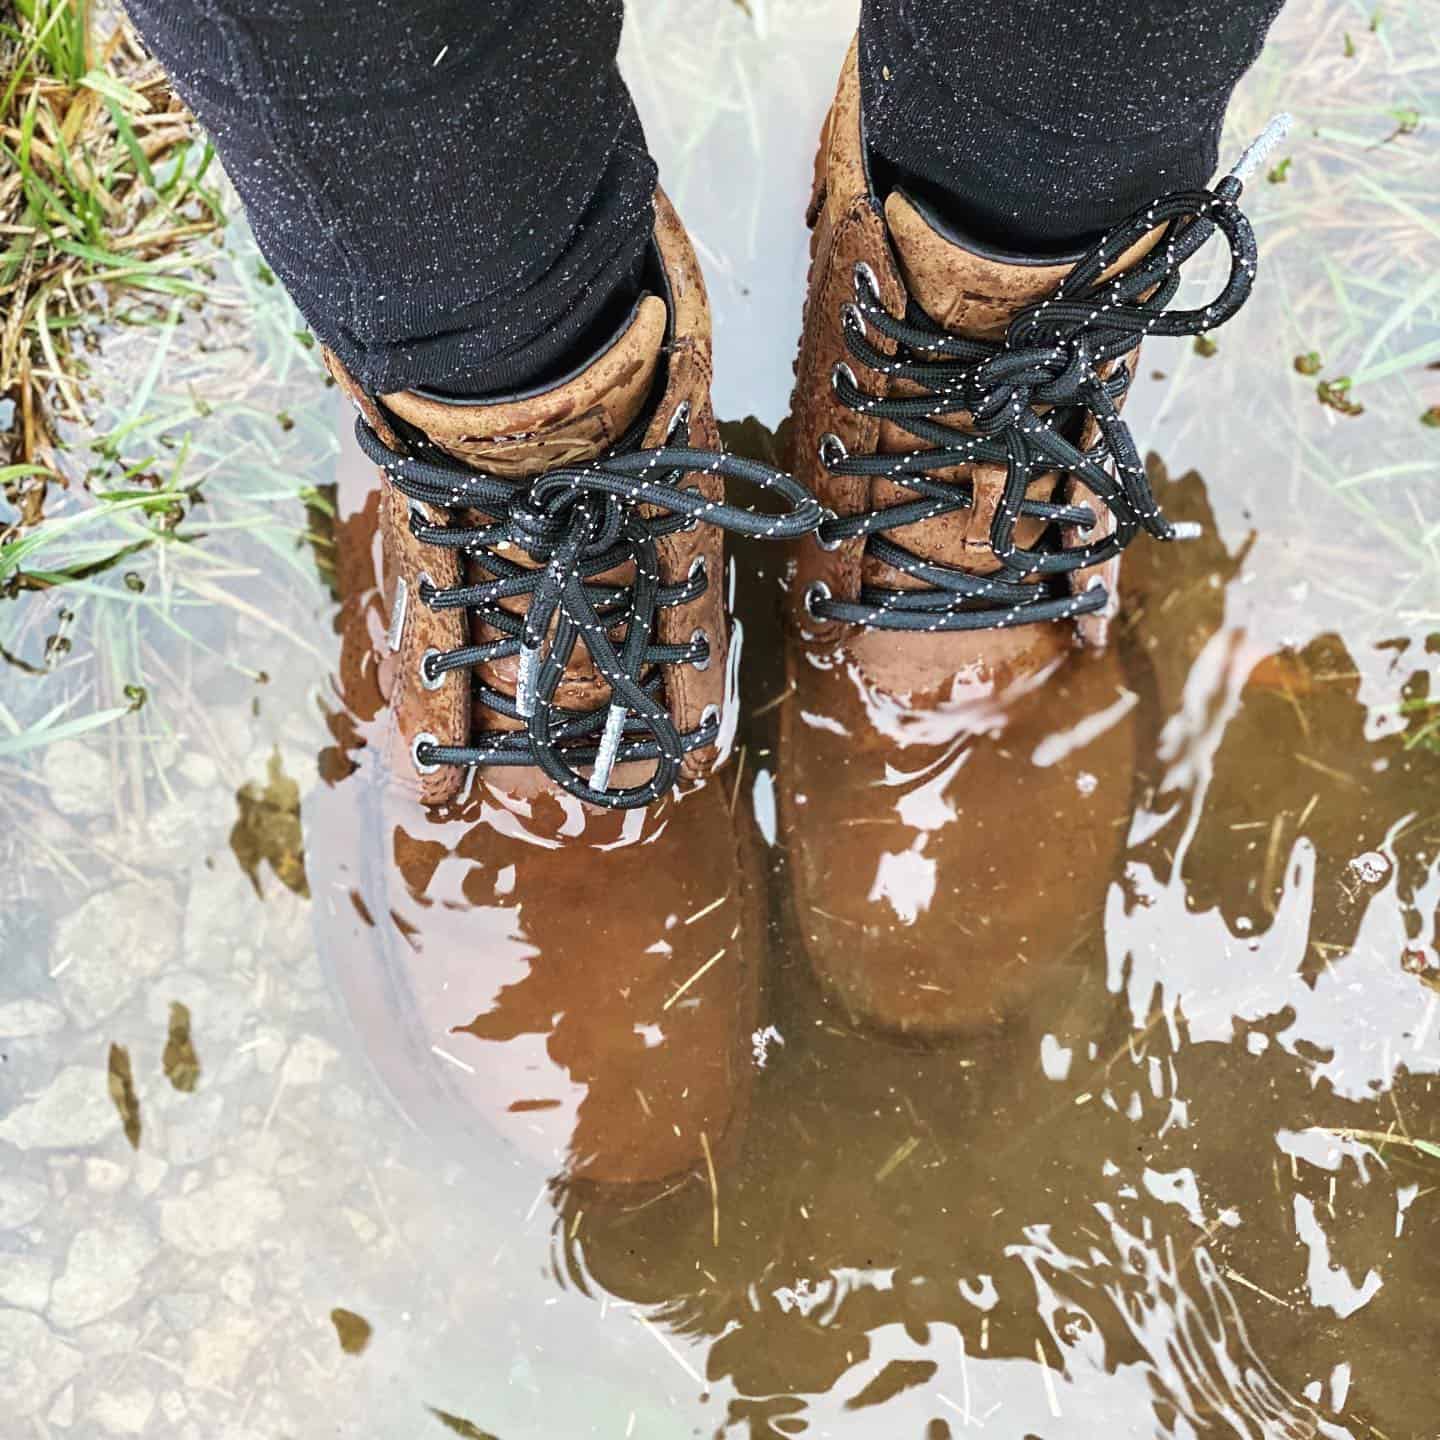 waterproofed boots submerged in water